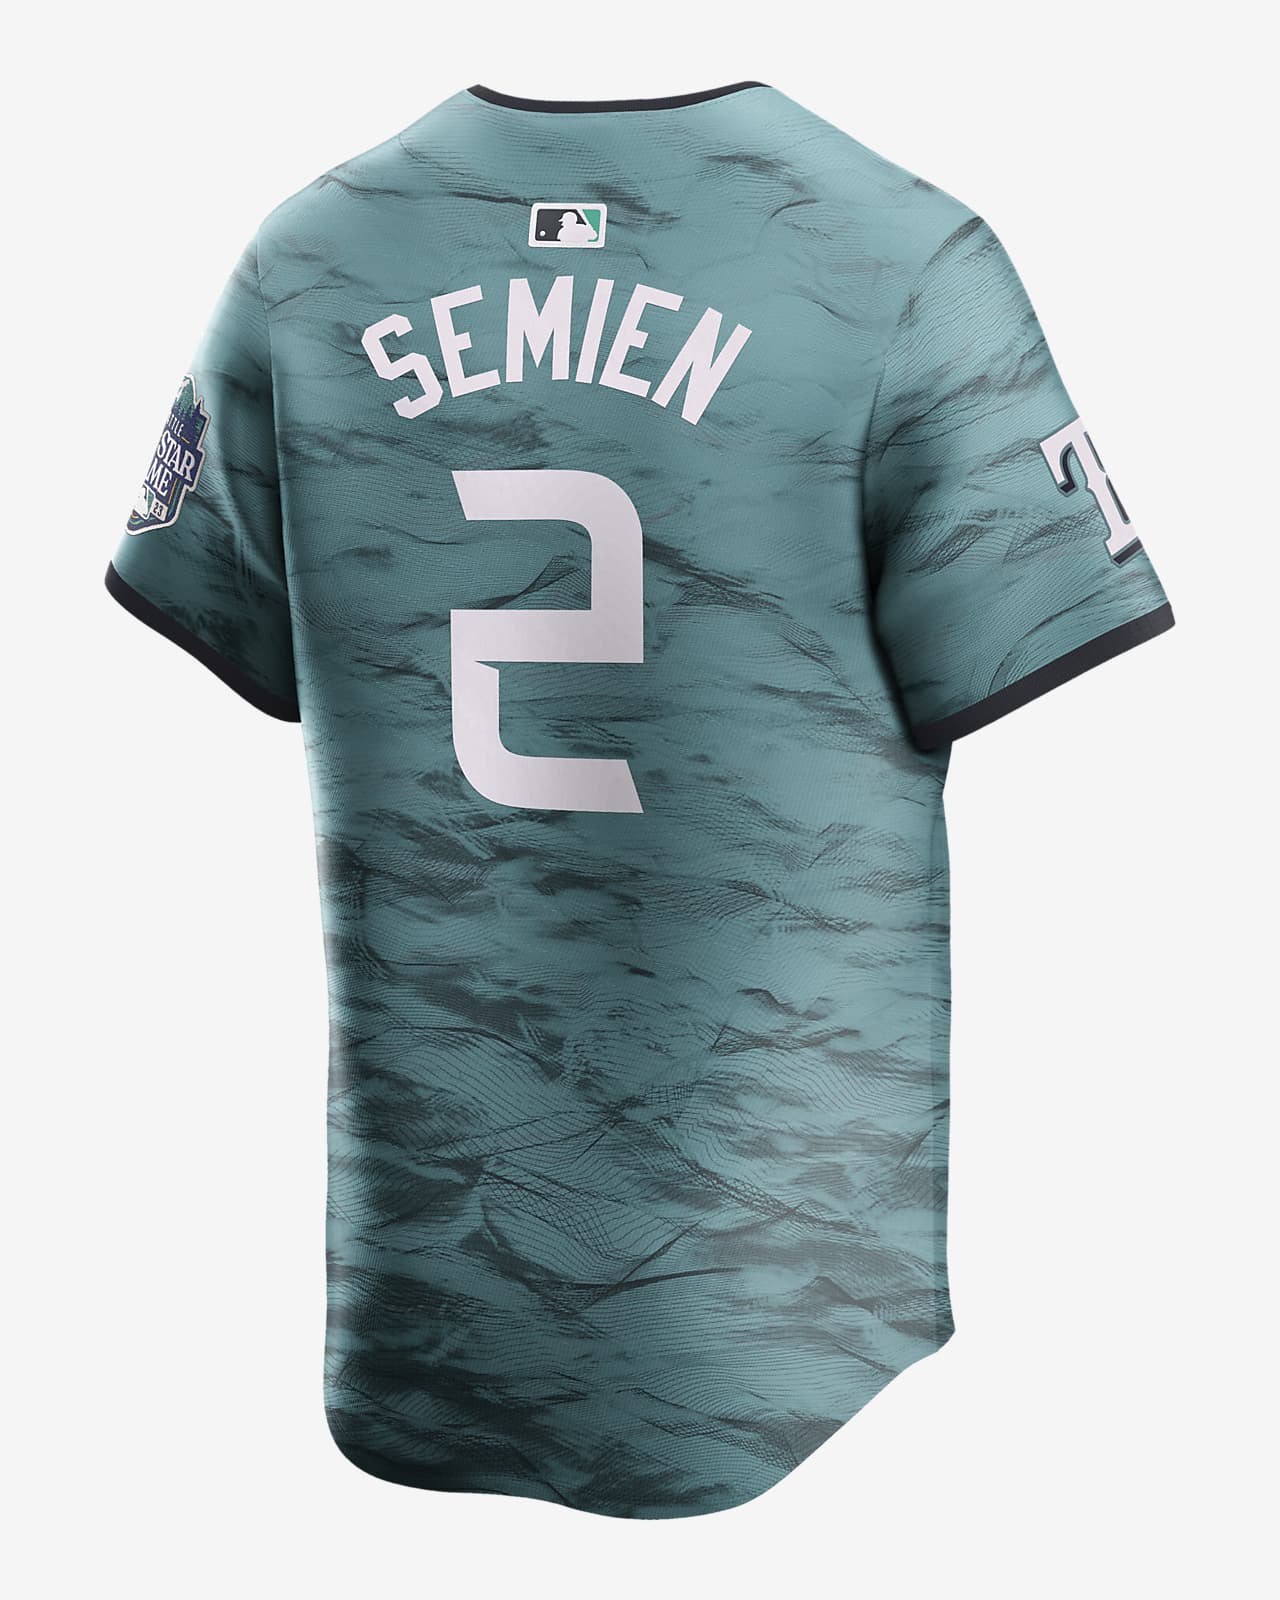 Marcus Semien All Star Game 2023 shirt - Limotees